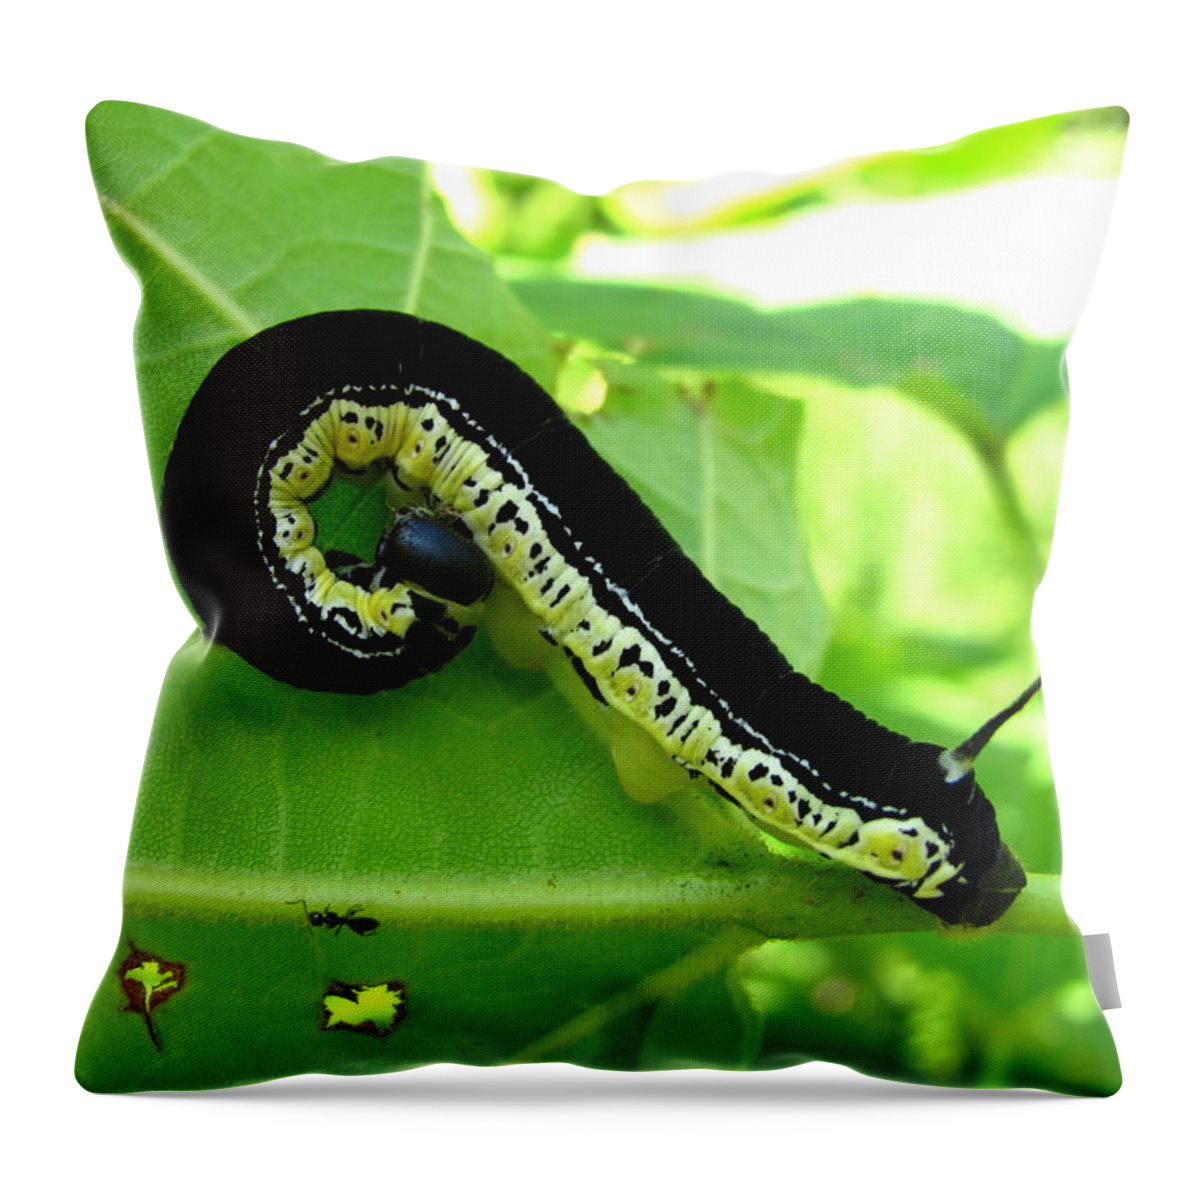 Catalapa Sphinx Throw Pillow featuring the photograph Catalapa Sphinx Caterpillar by Joshua Bales